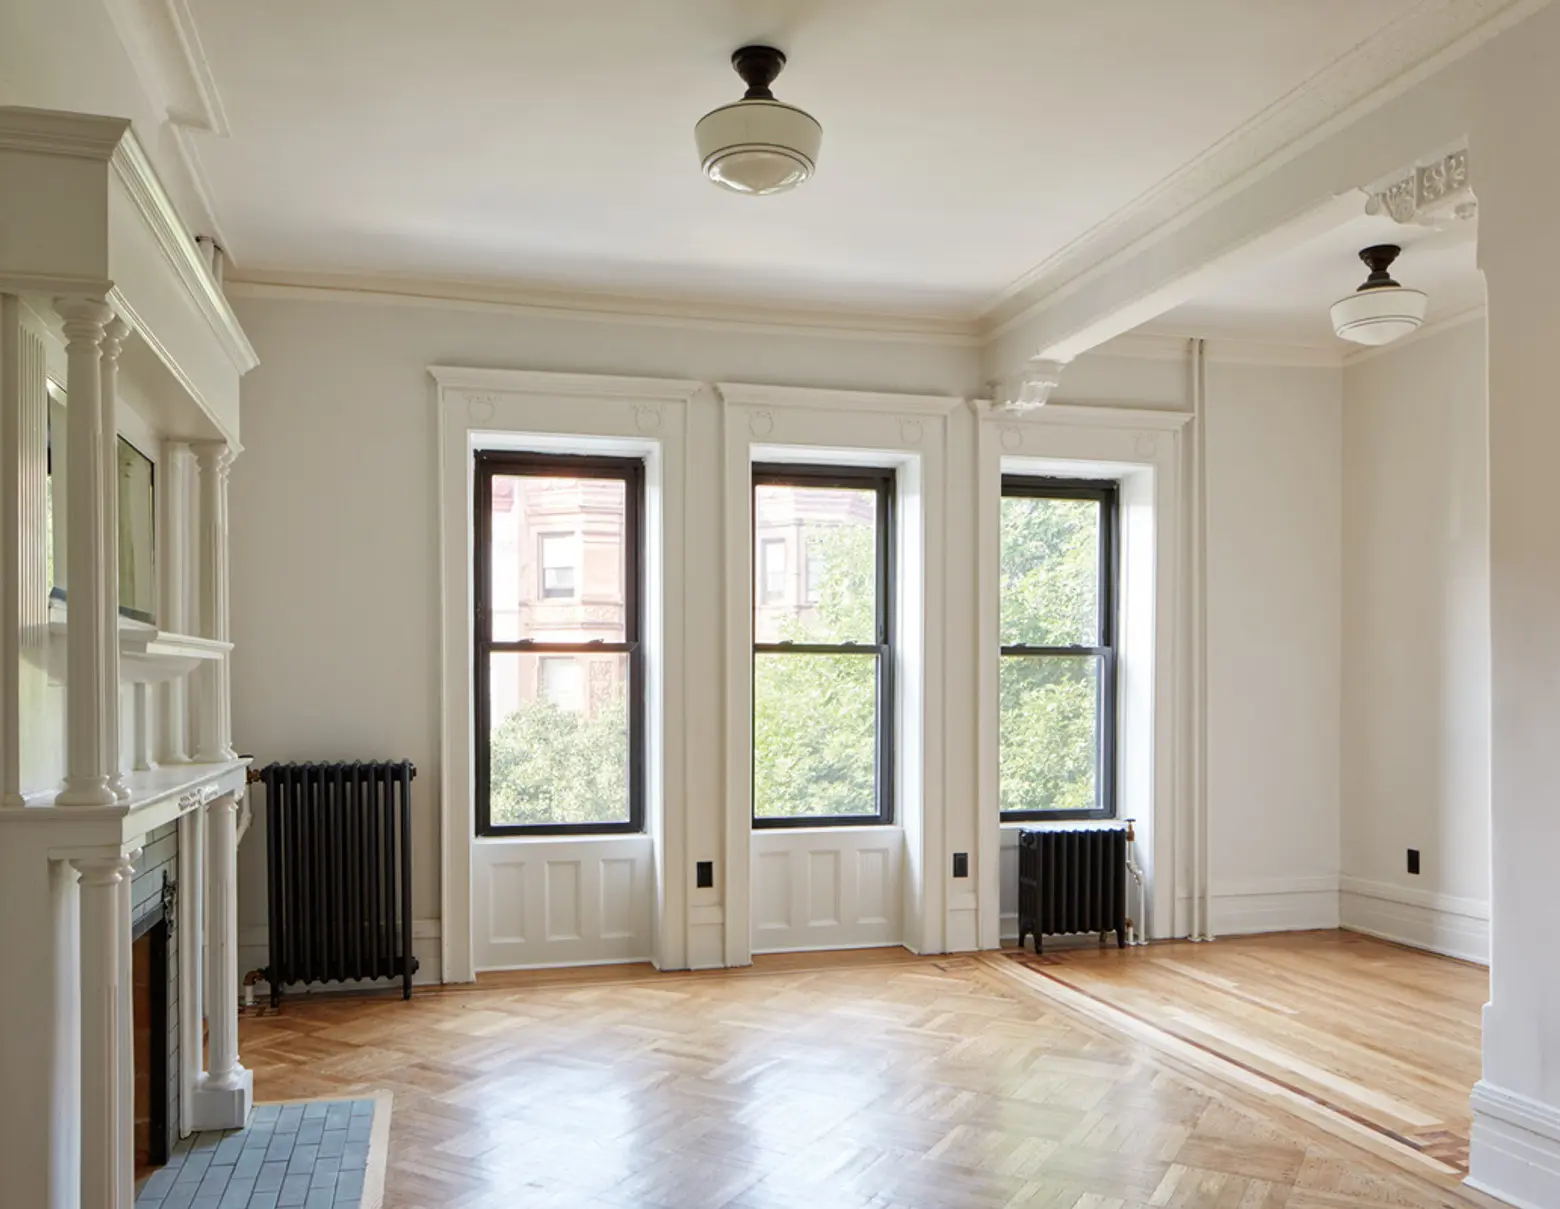 390 Sterling Place, WE Design, Prospect Heights, Townhouse, Brooklyn, Cool Listing, Brooklyn townhouse for sale, Interiors, Renovation,